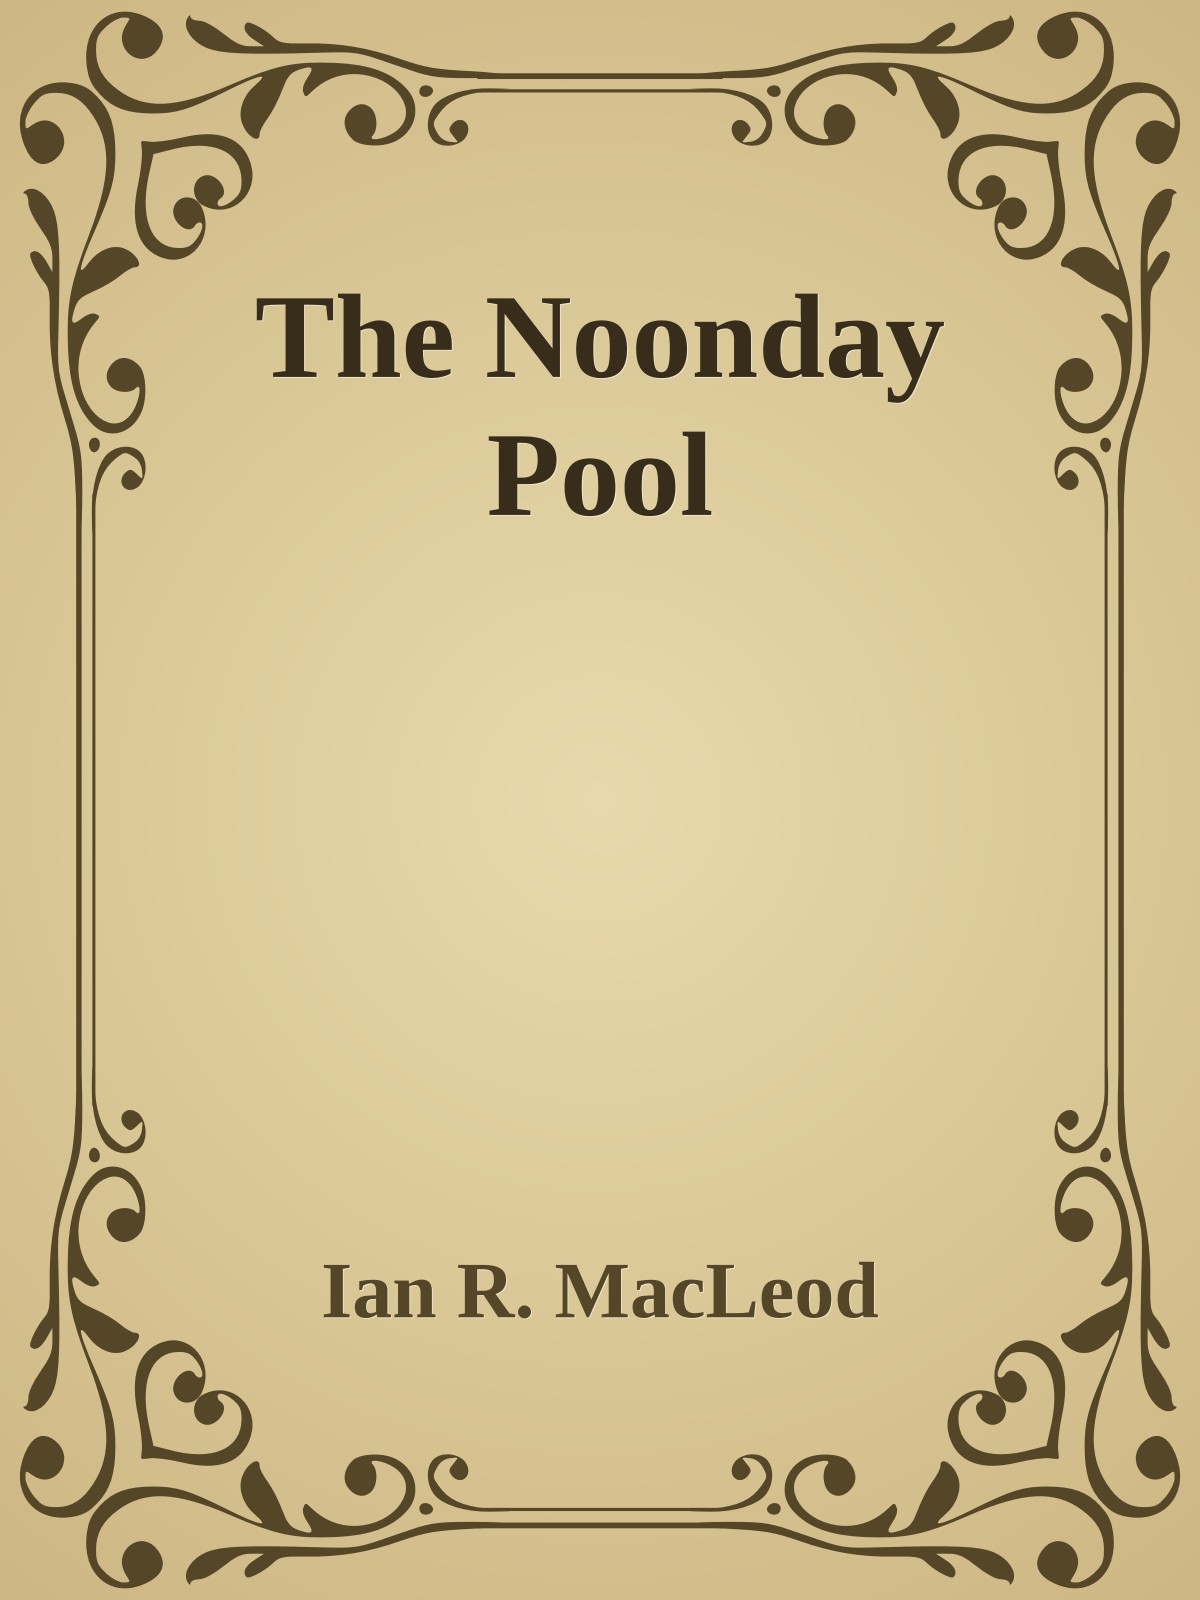 The Noonday Pool